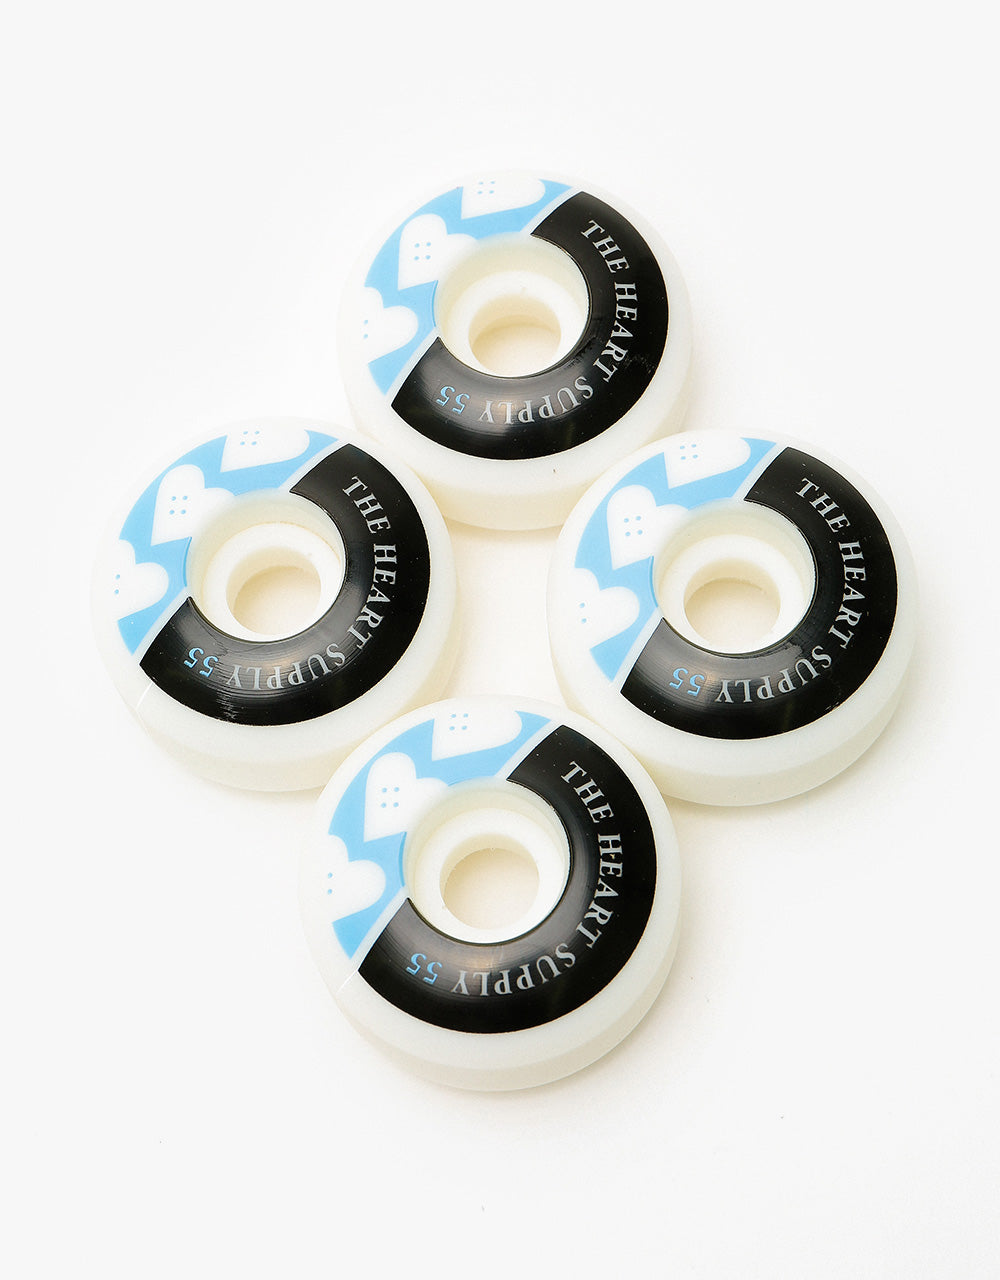 The Heart Supply Squad 99a Skateboard Wheel - 55mm